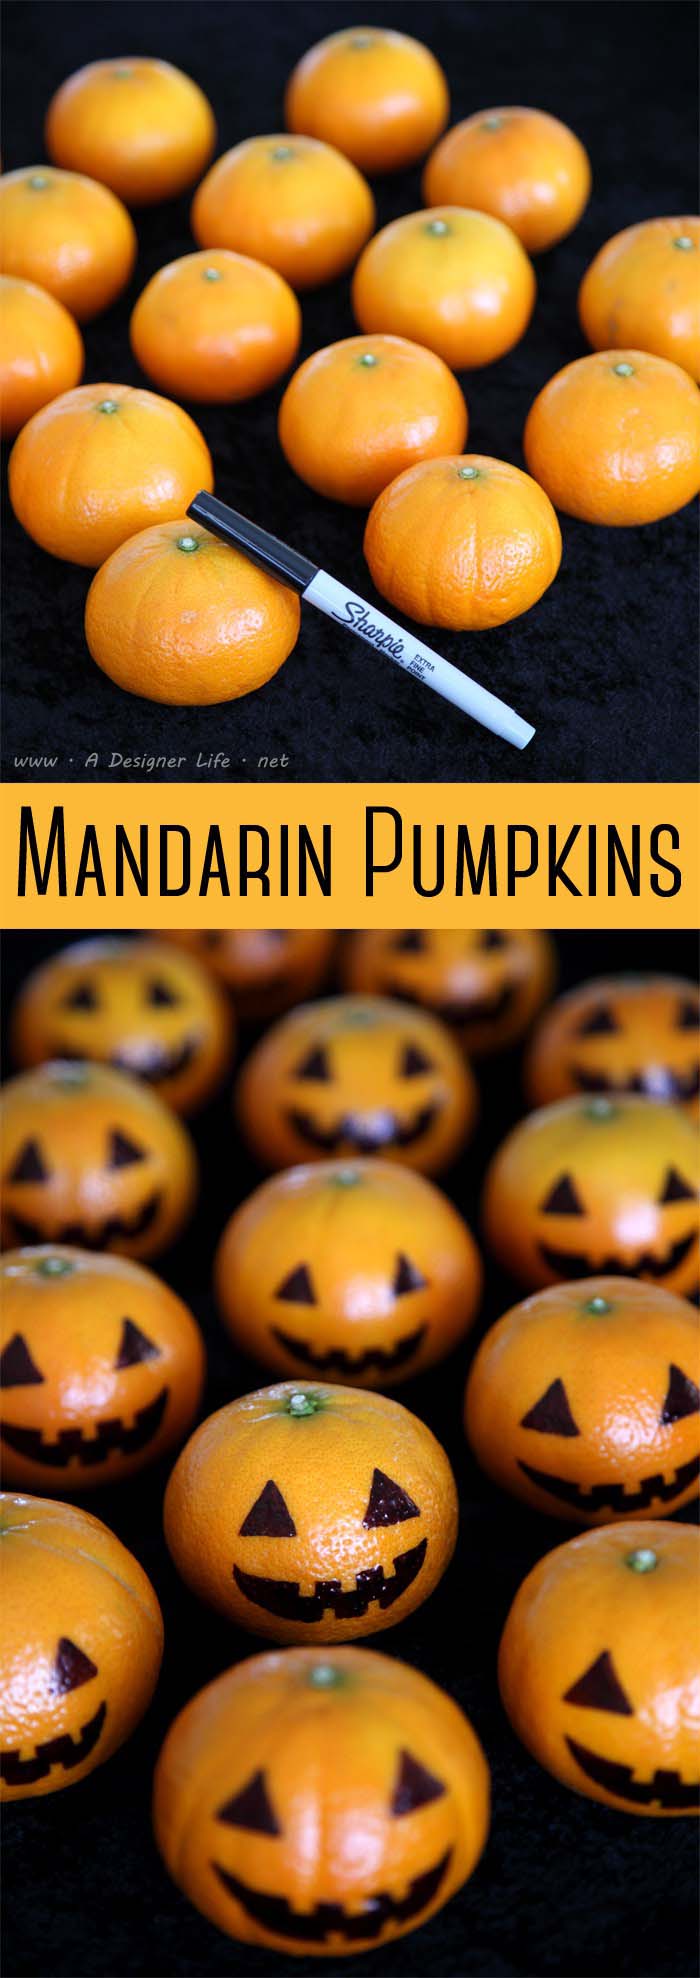 32. Pumpkin Treats for Guests of All Ages #halloween #party #decor #decorhomeideas